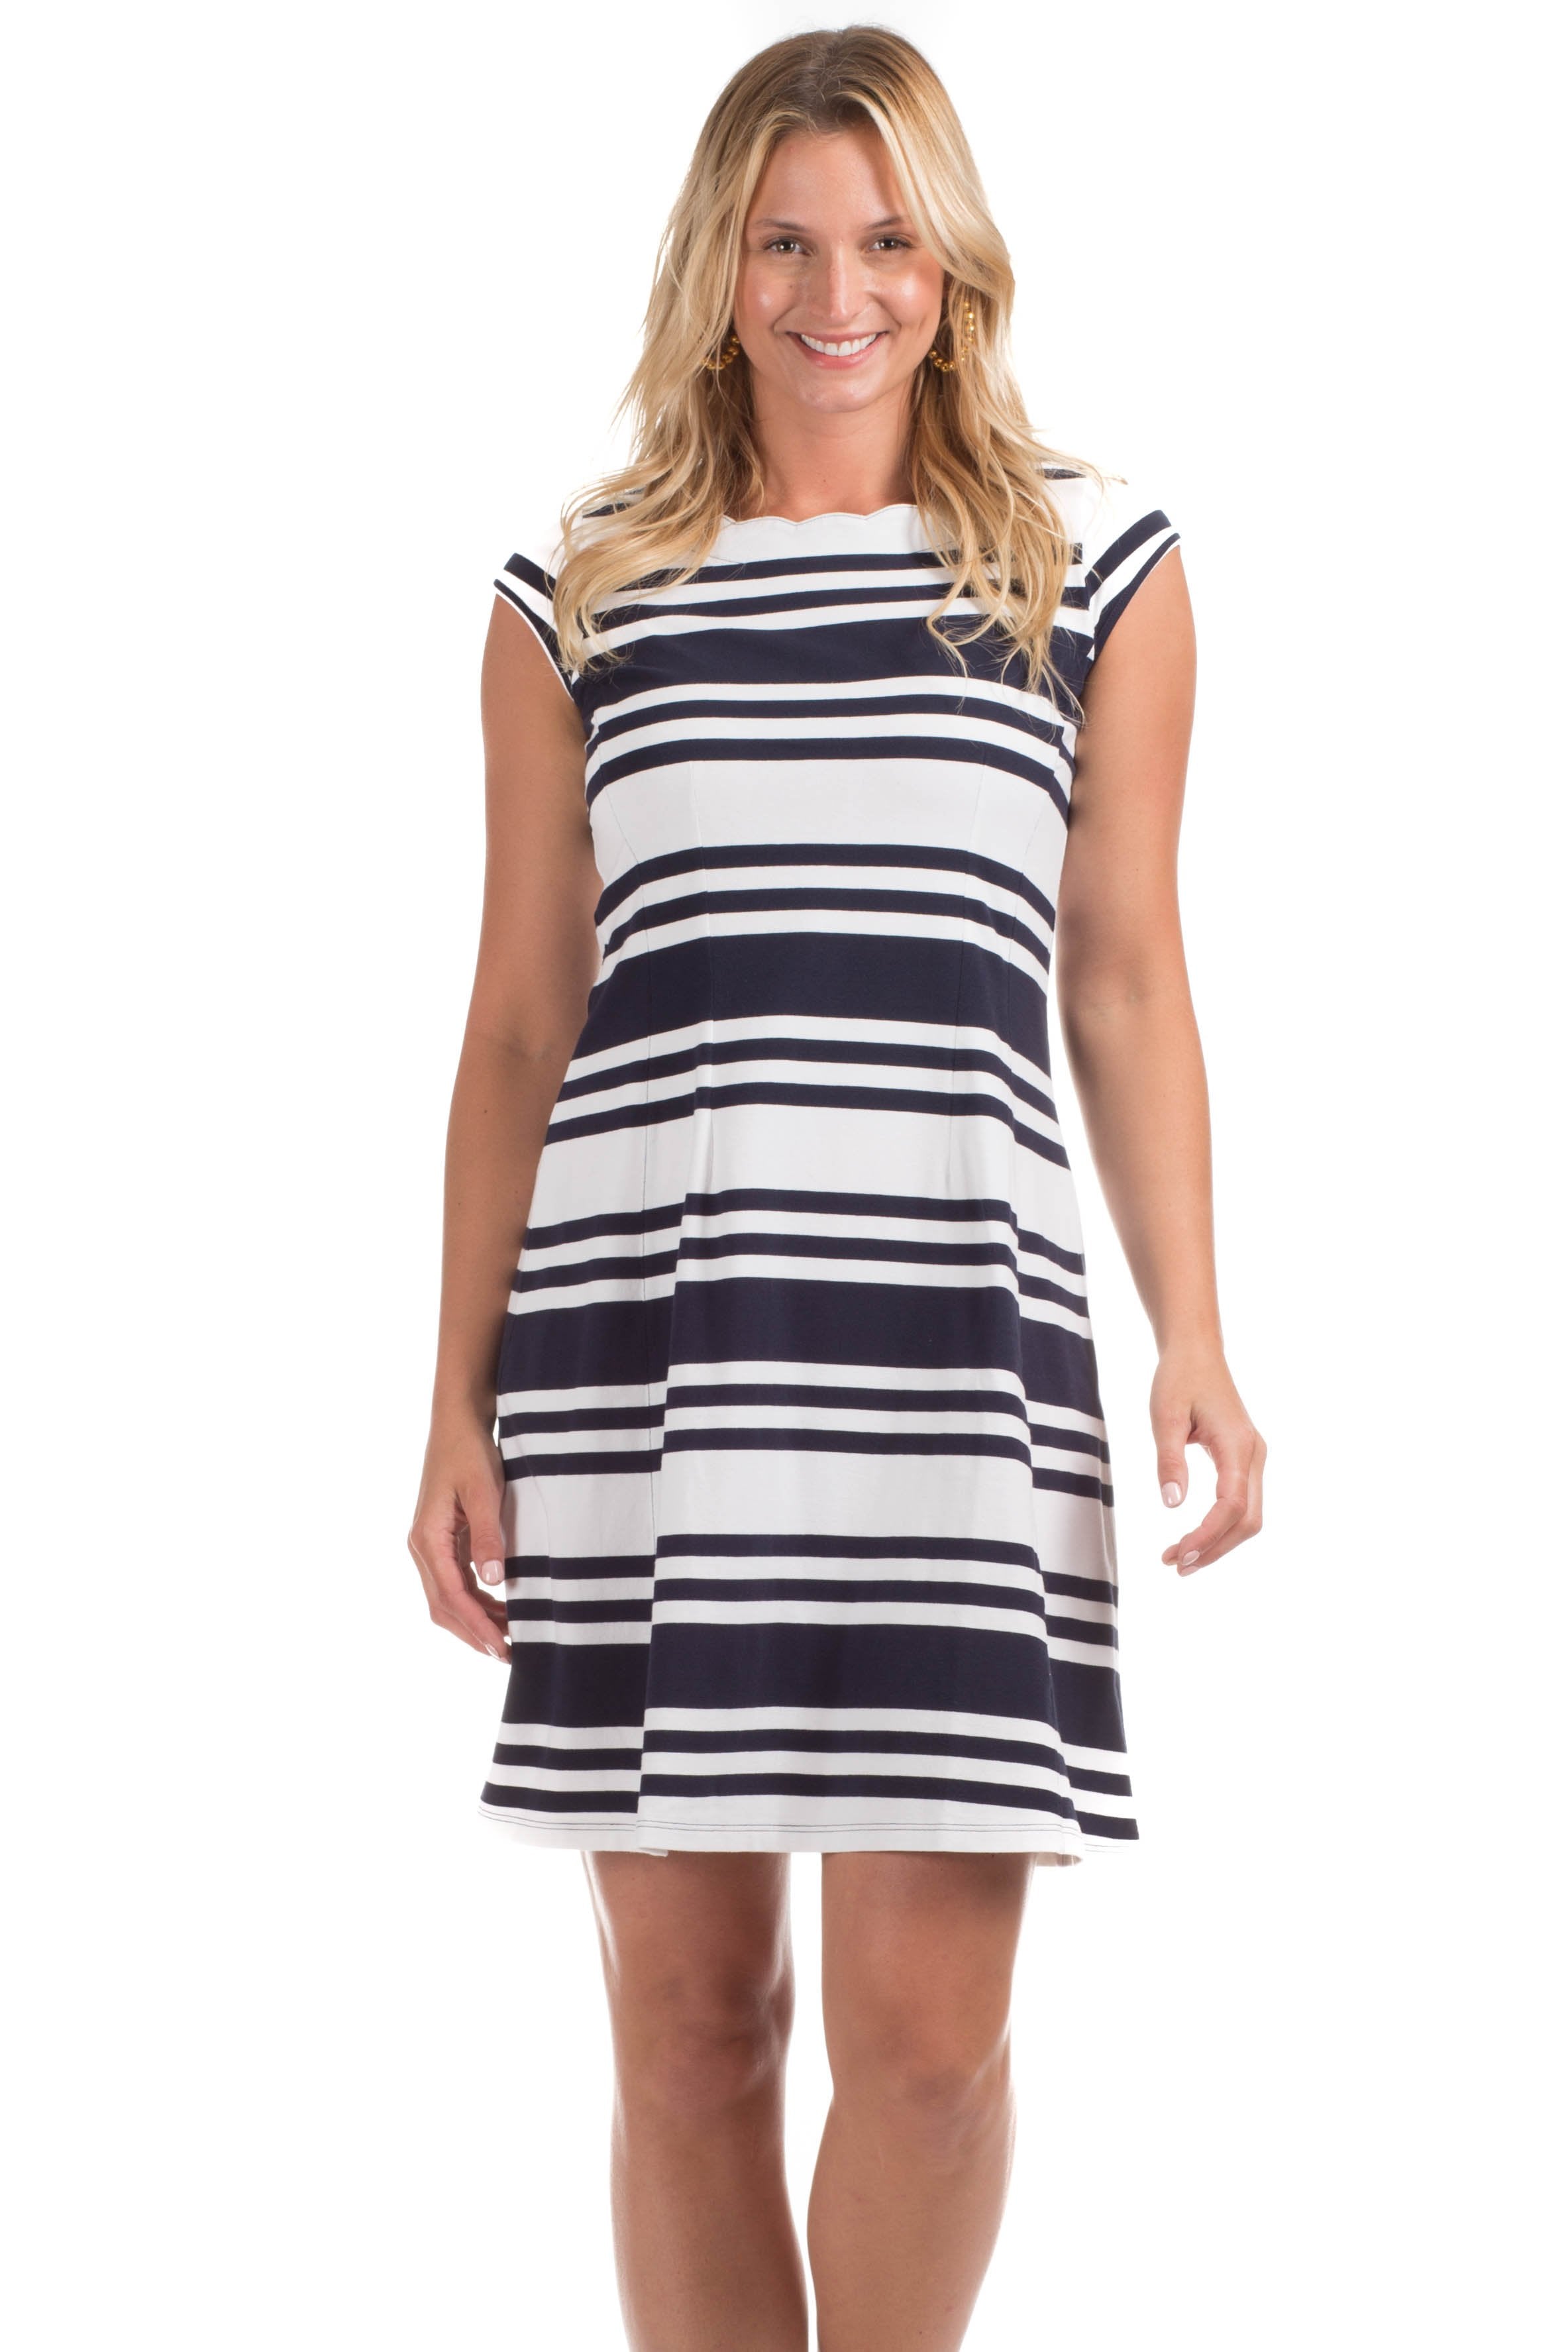 Duffield Lane Hackley Dress in Navy and White Stripe | Preppy Dresses ...